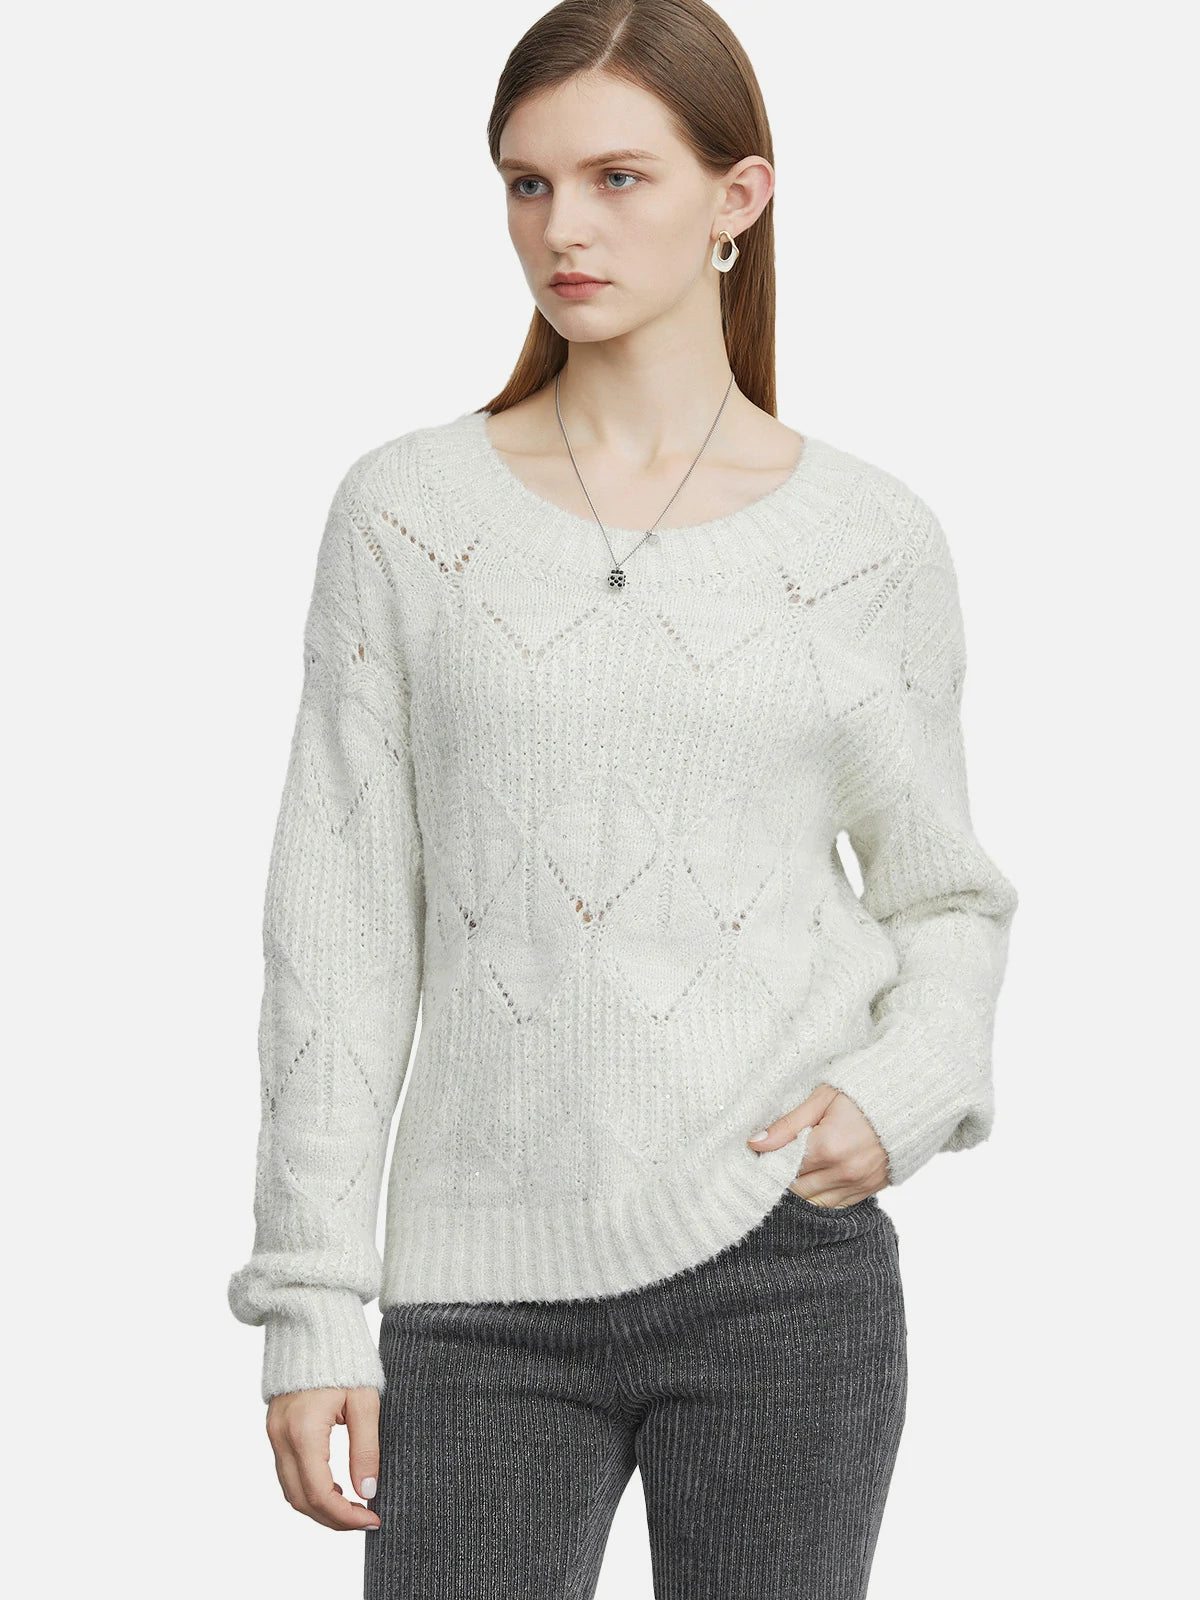 Classic round neck knit sweater with crochet lace design